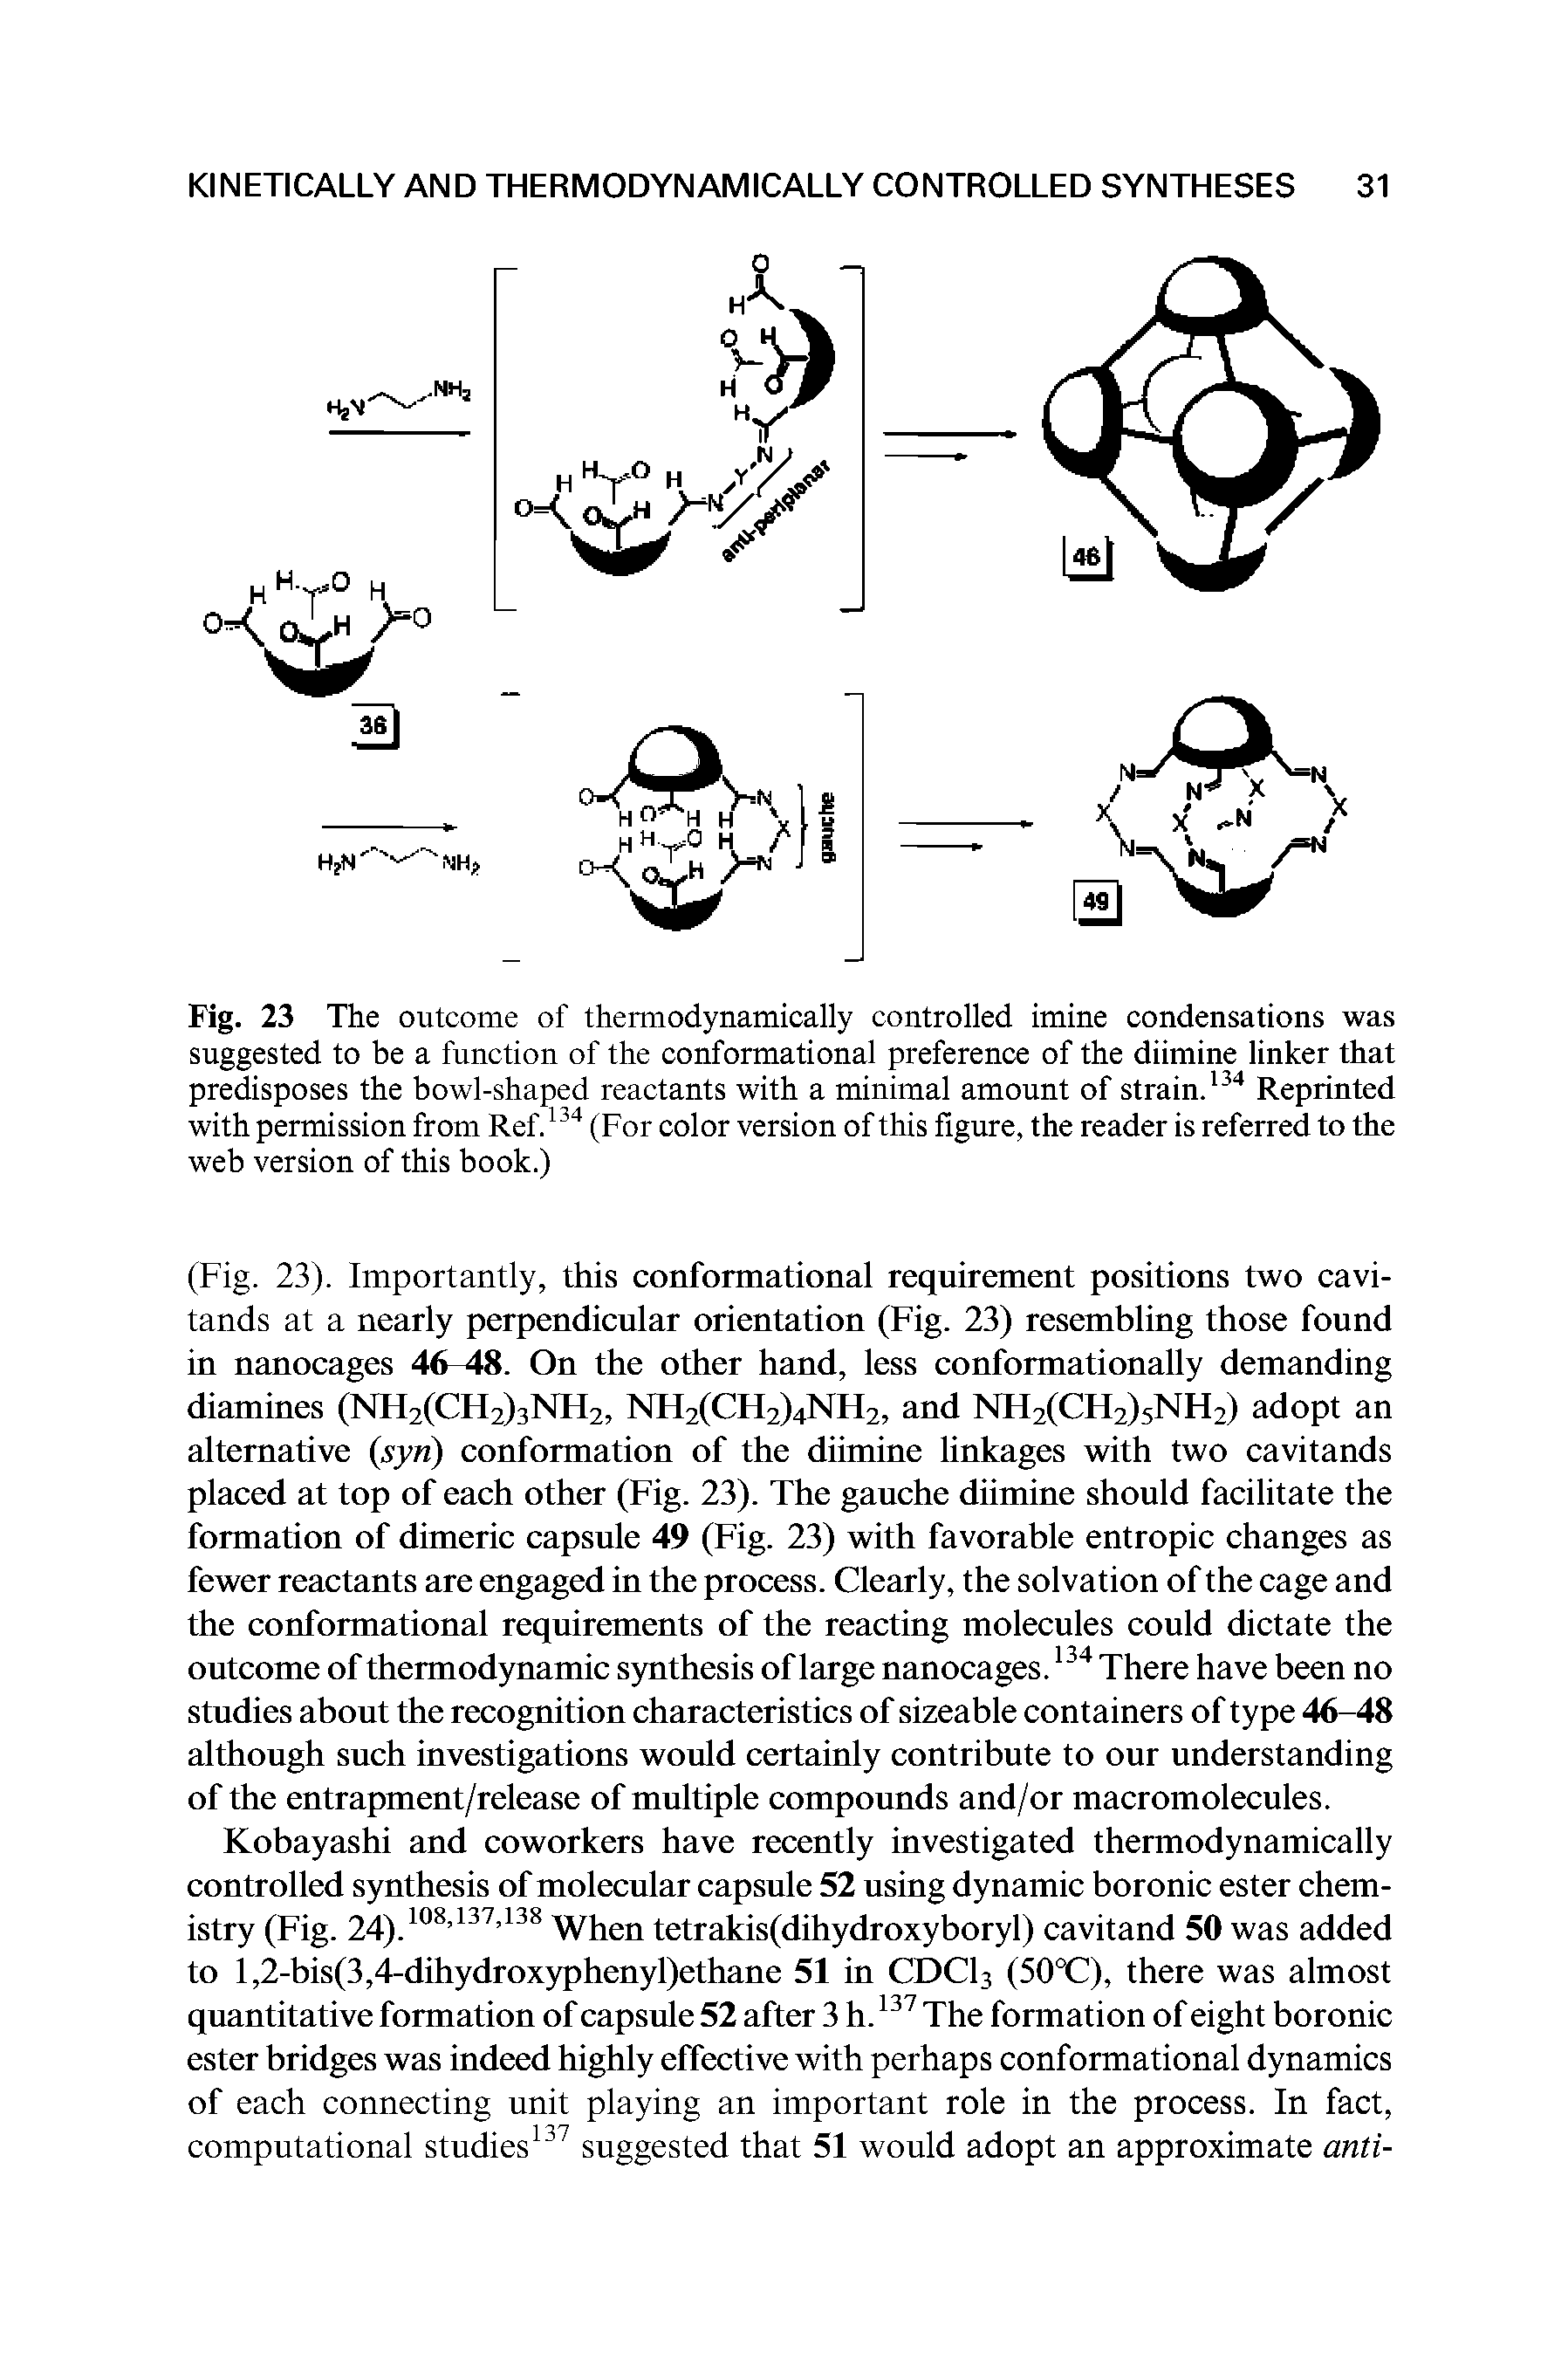 Fig. 23 The outcome of thermodynamically controlled imine condensations was suggested to be a function of the conformational preference of the diimine linker that predisposes the bowl-shaped reactants with a minimal amount of strain.134 Reprinted with permission from Ref.134 (For color version of this figure, the reader is referred to the web version of this book.)...